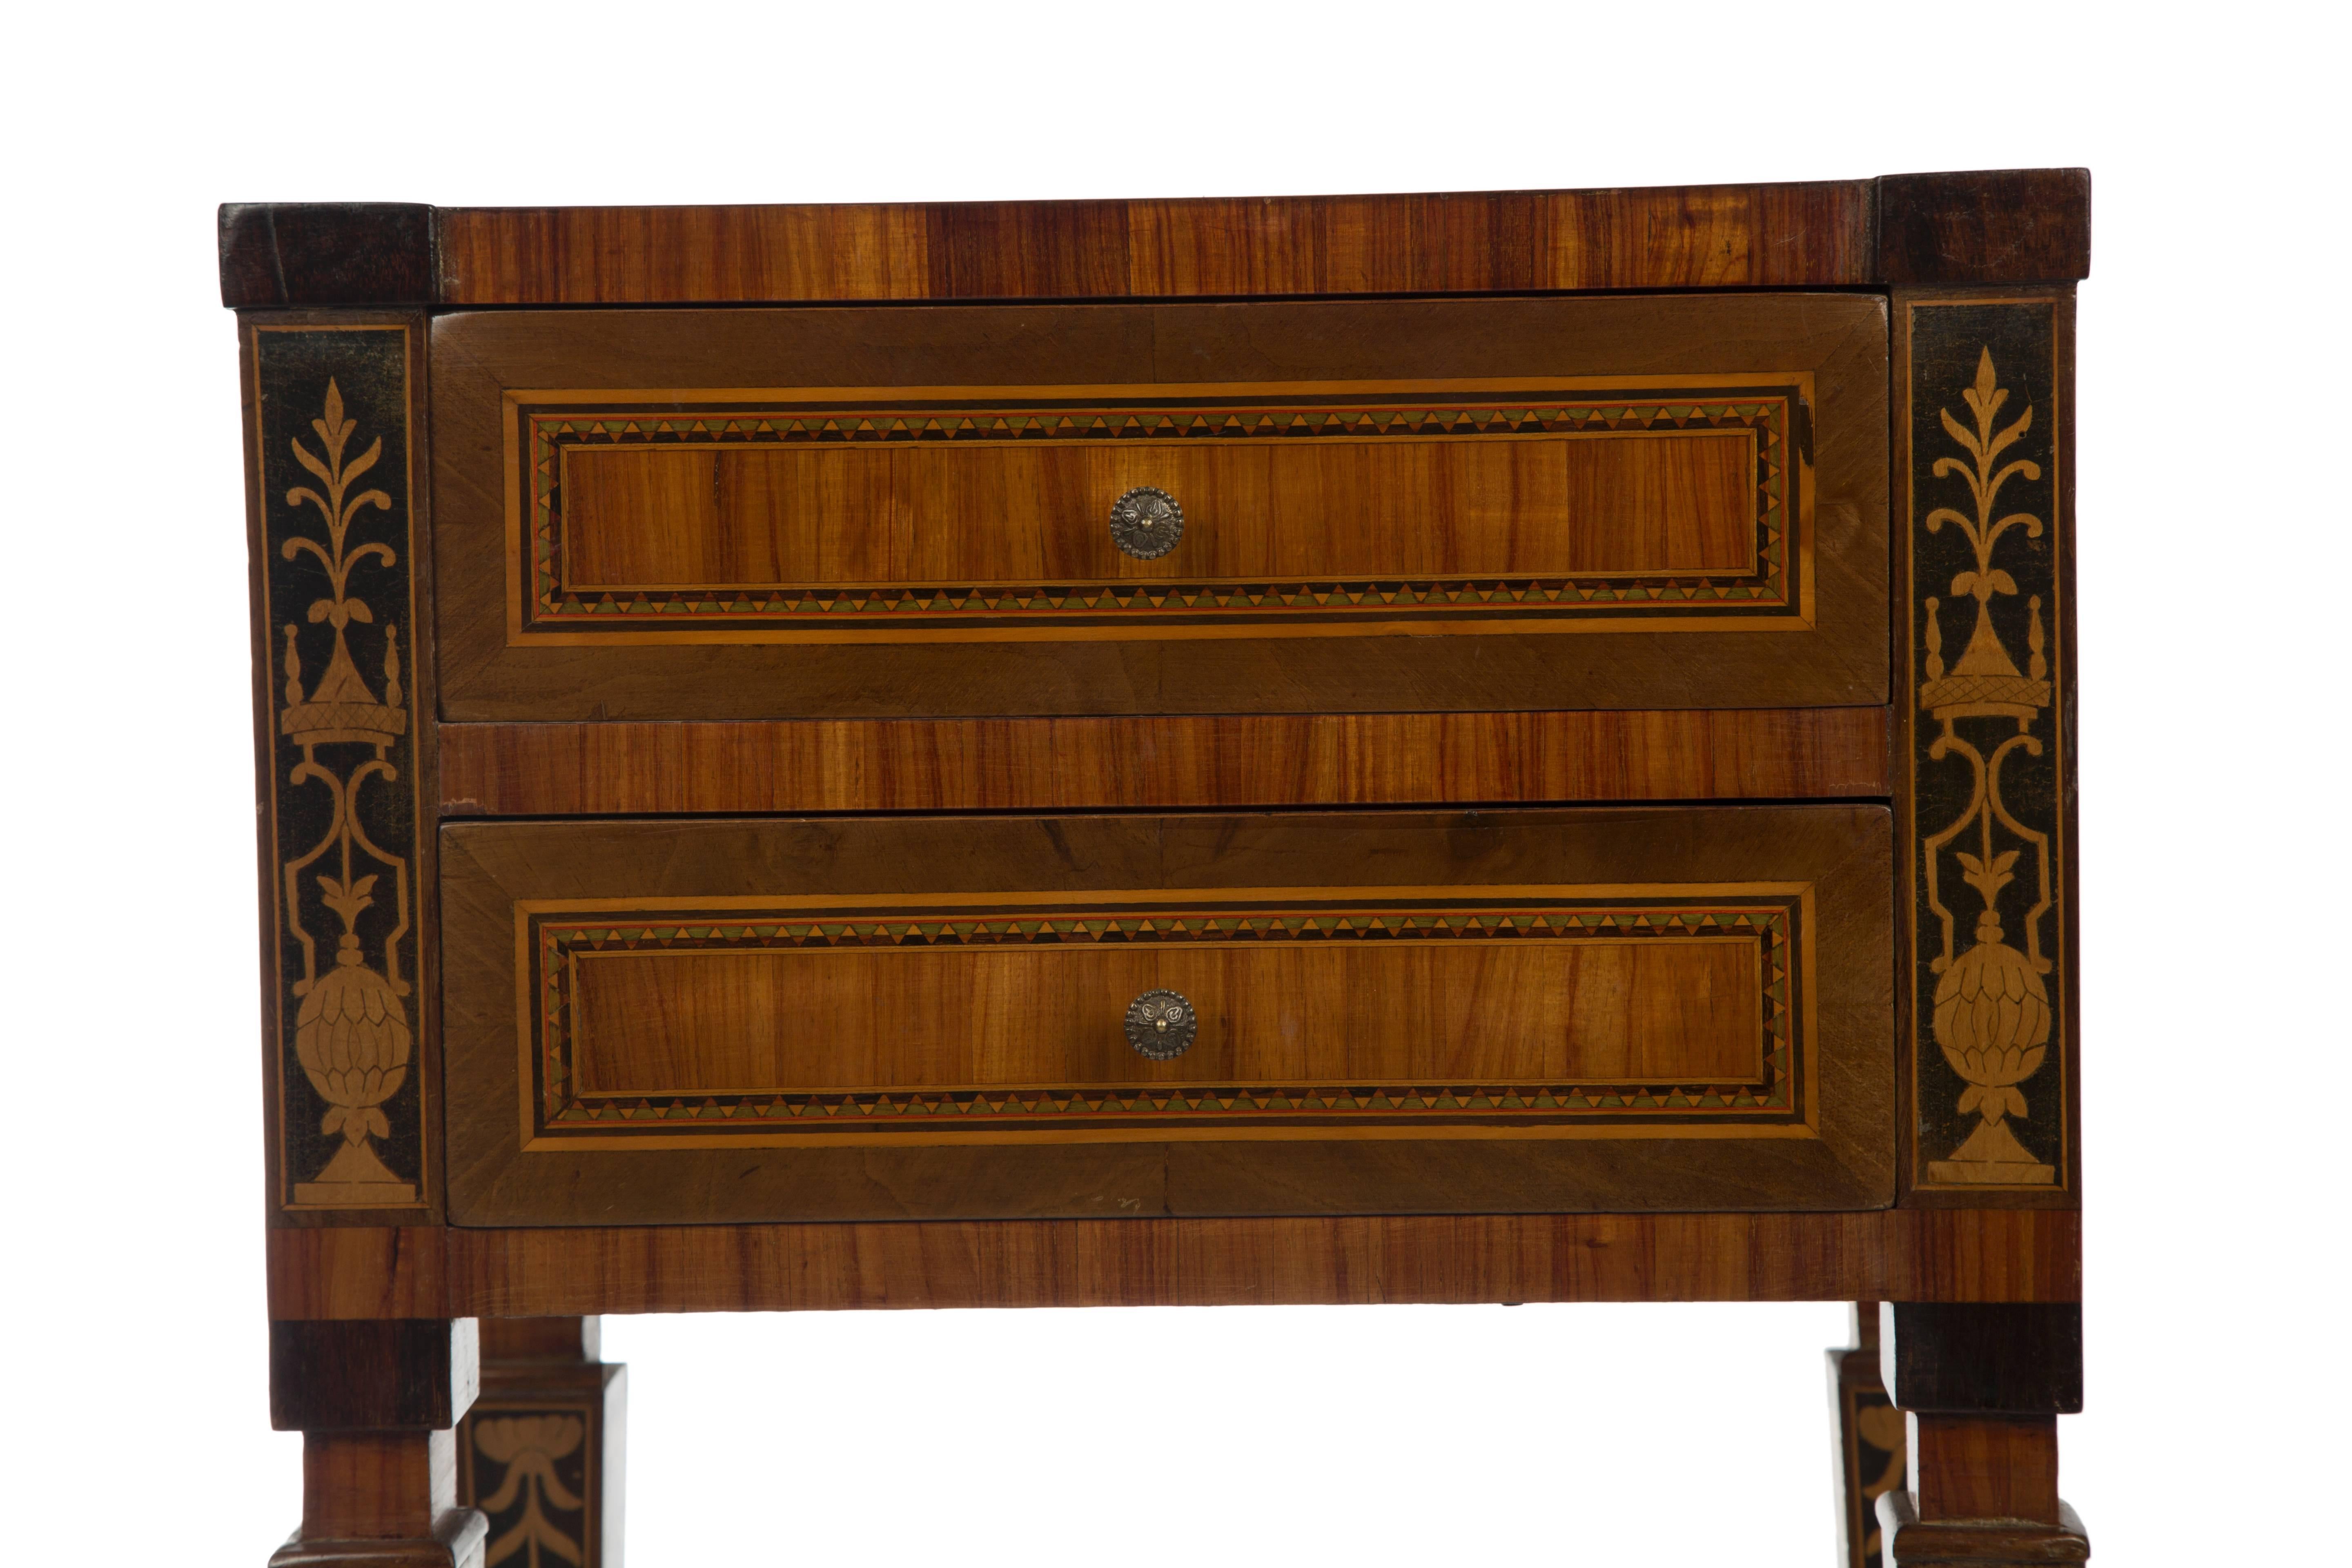 Elegant pair of Italian tables in the manner of G. Maggiolini. Side tables veneered in marquetry fruitwood, walnut and other wood inlay.